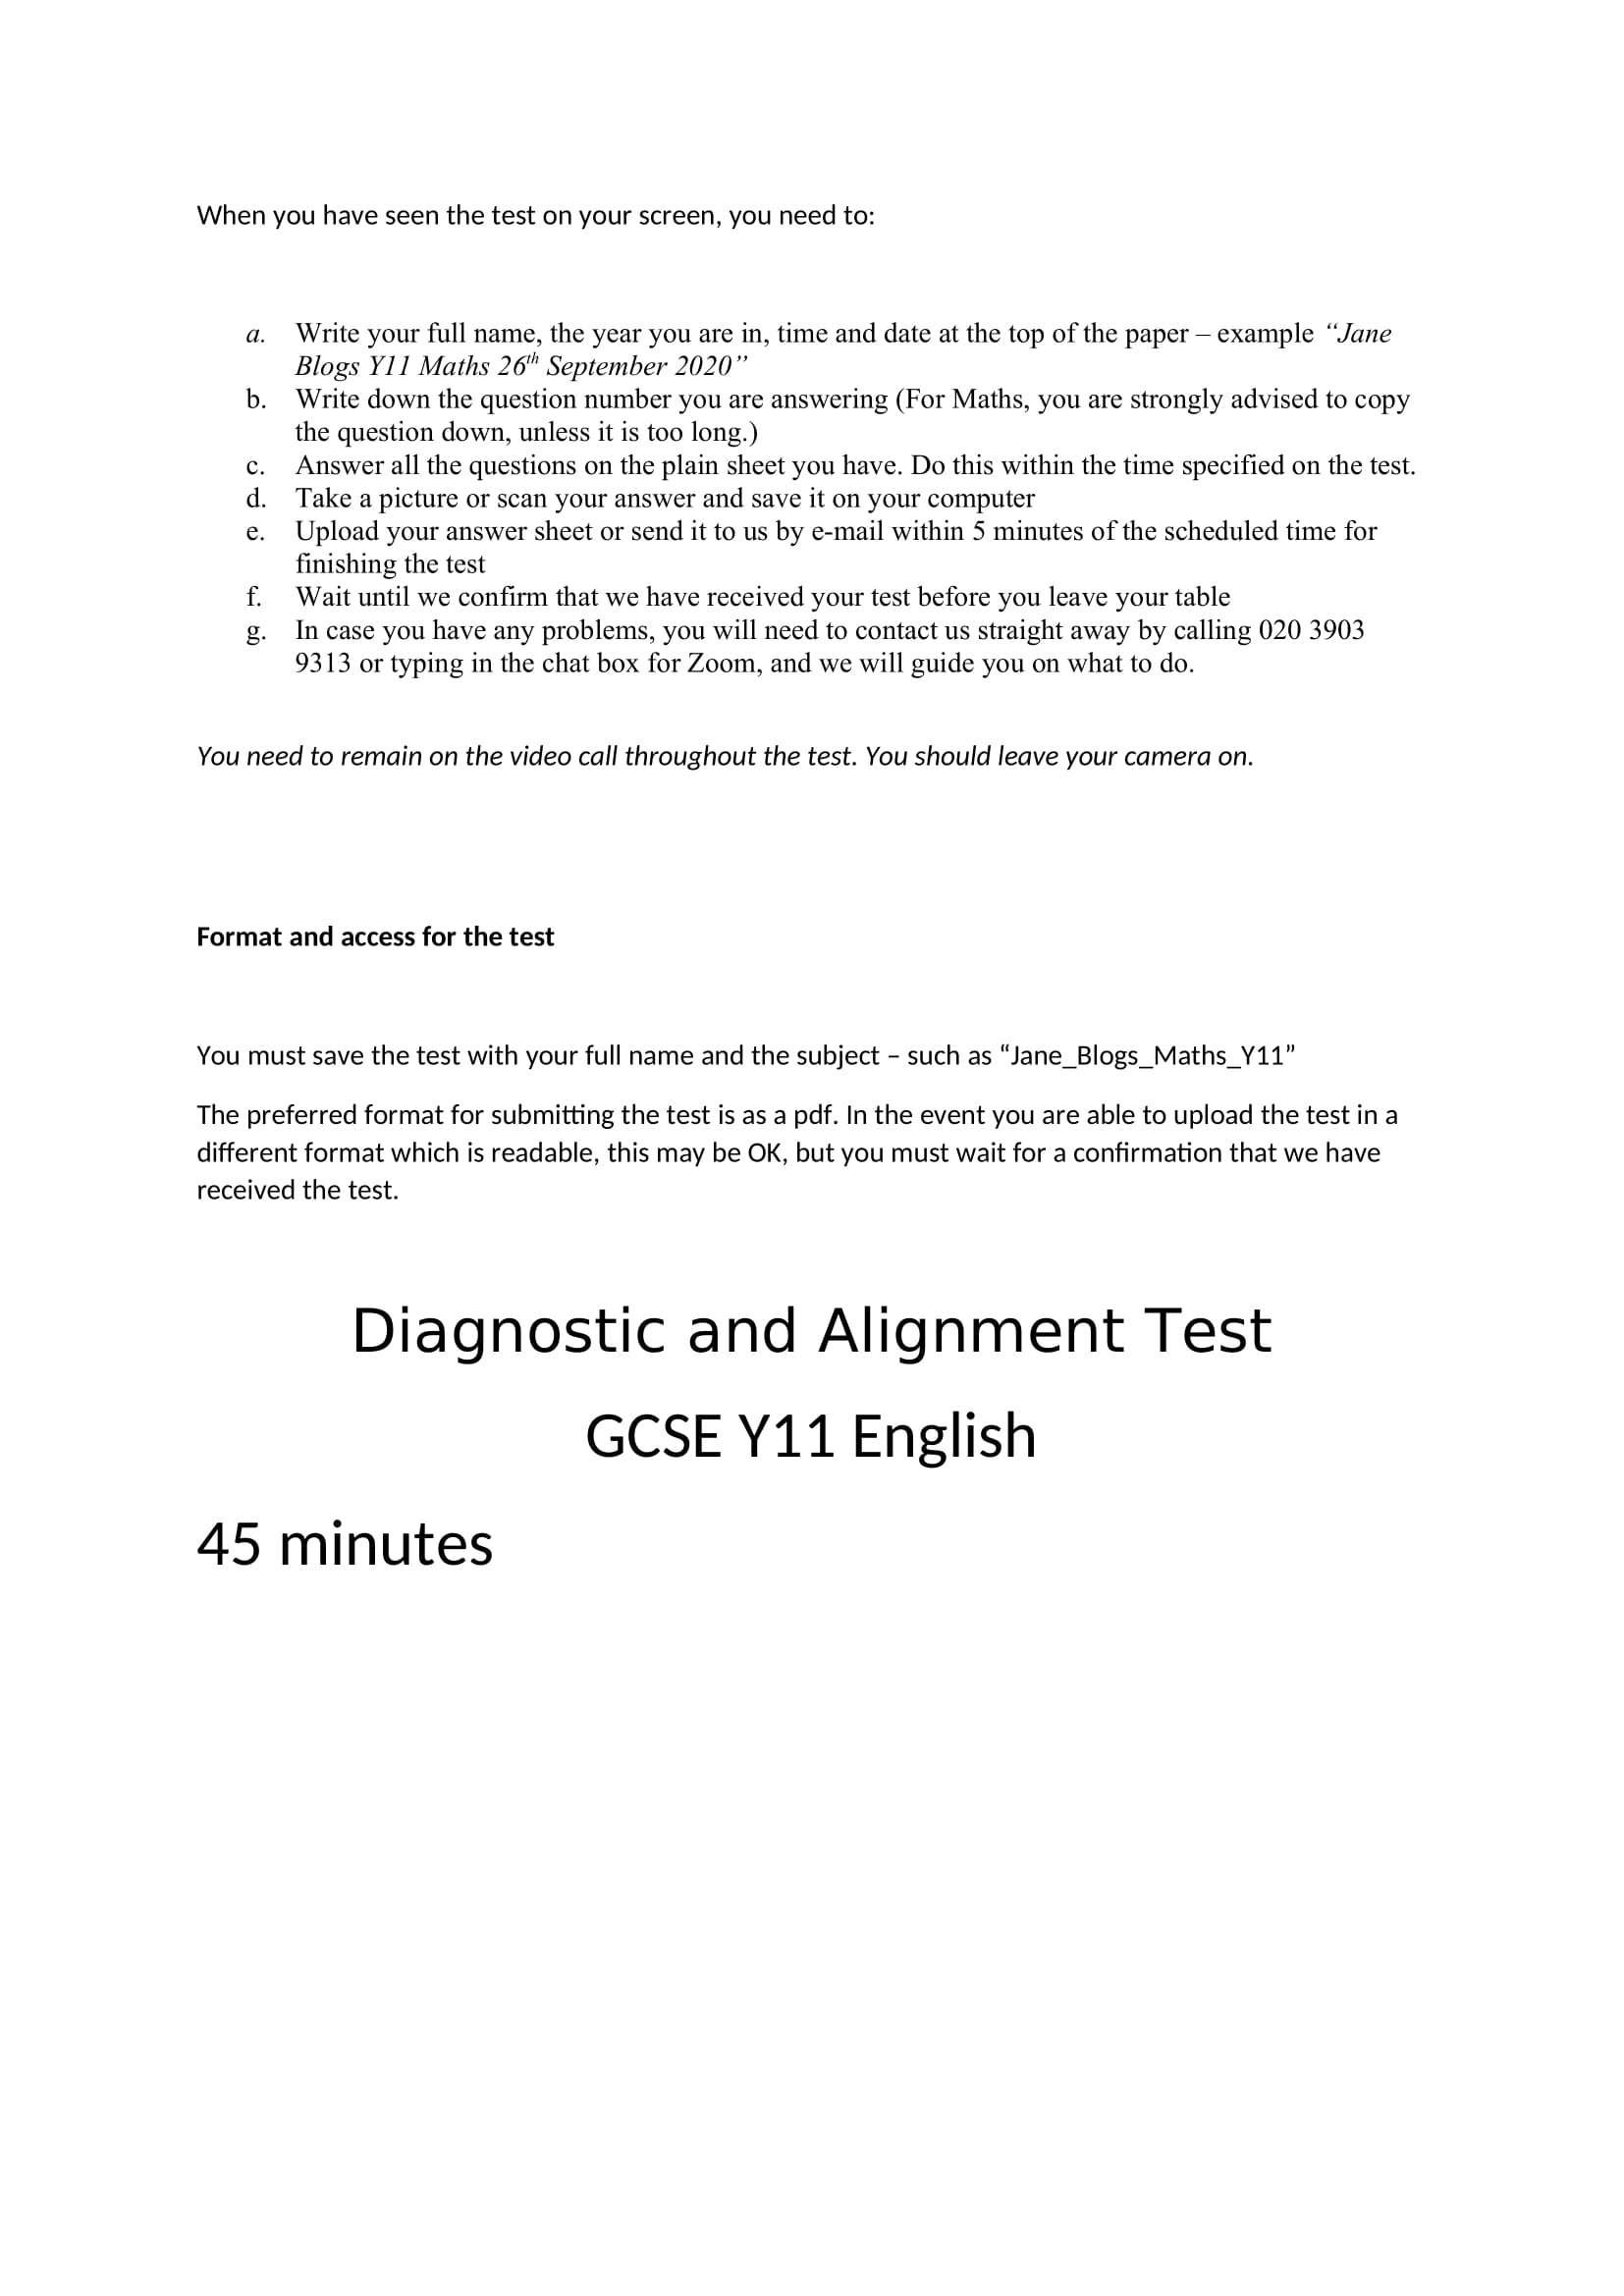 GCSE_Y11_English_Diagnostic and Alignment Test 2021-2